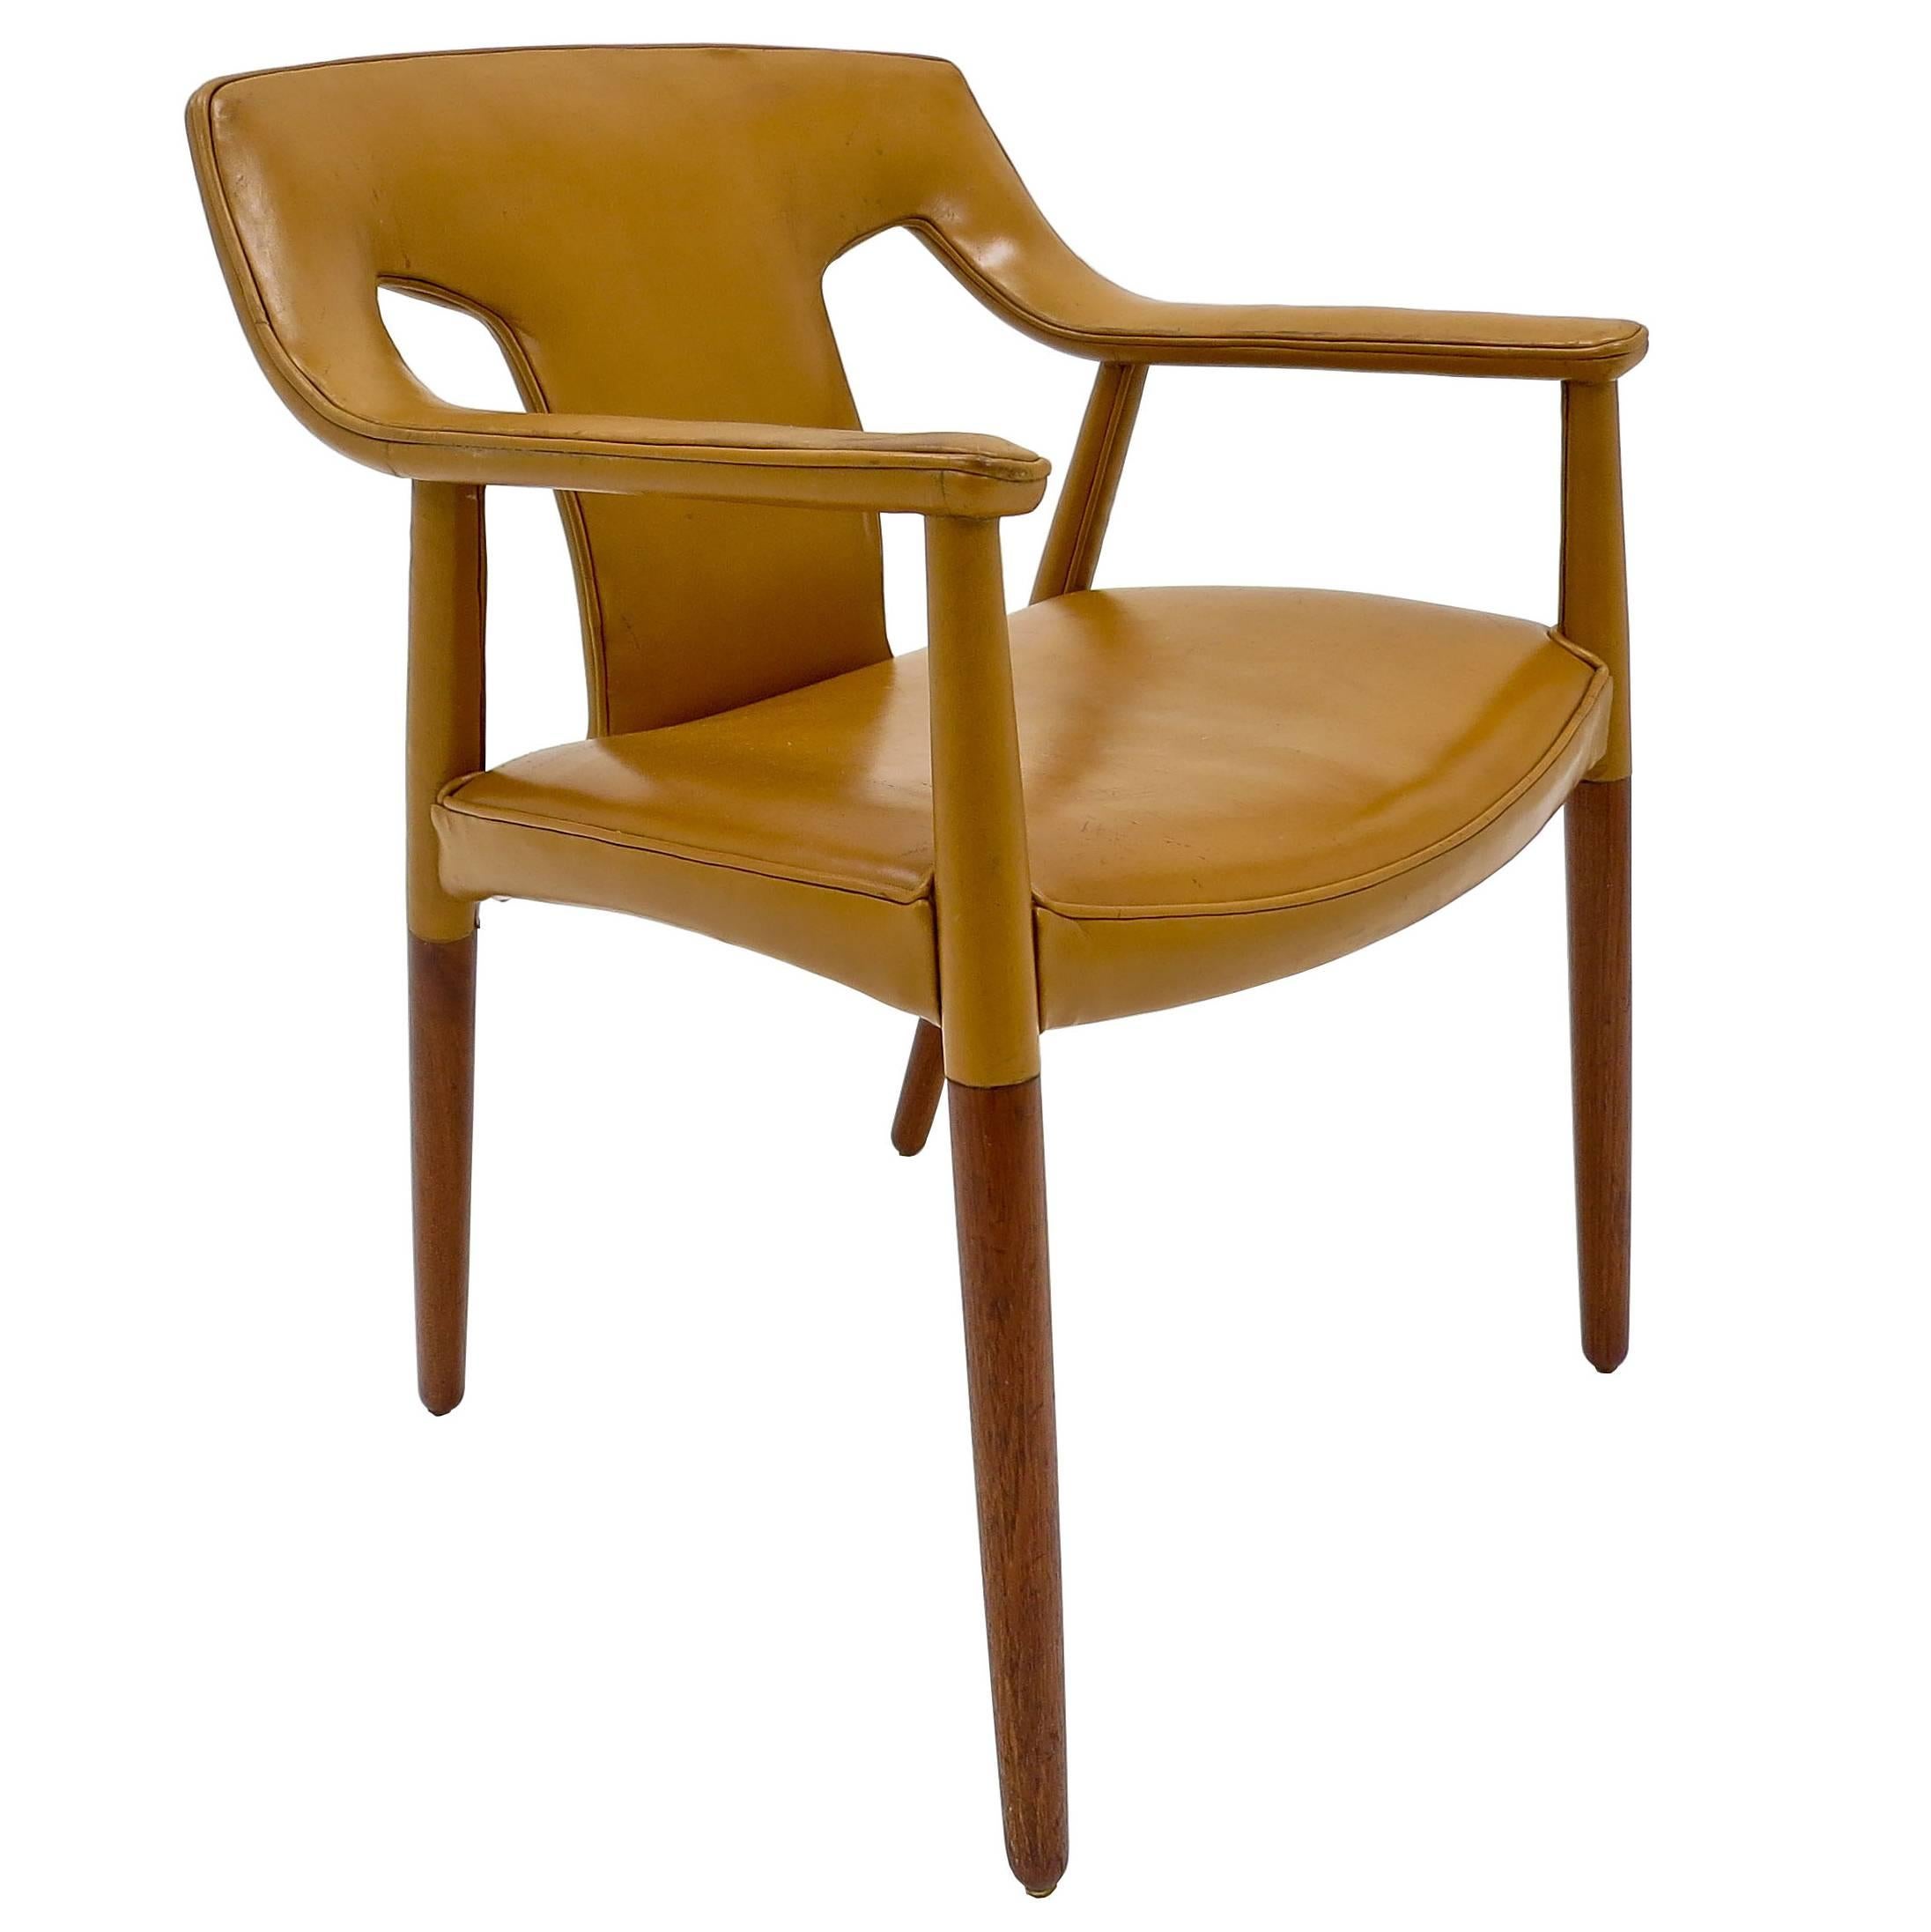 Bender Madsen and Larsen Armchair Leather and Teak, Danish, 1950s For Sale